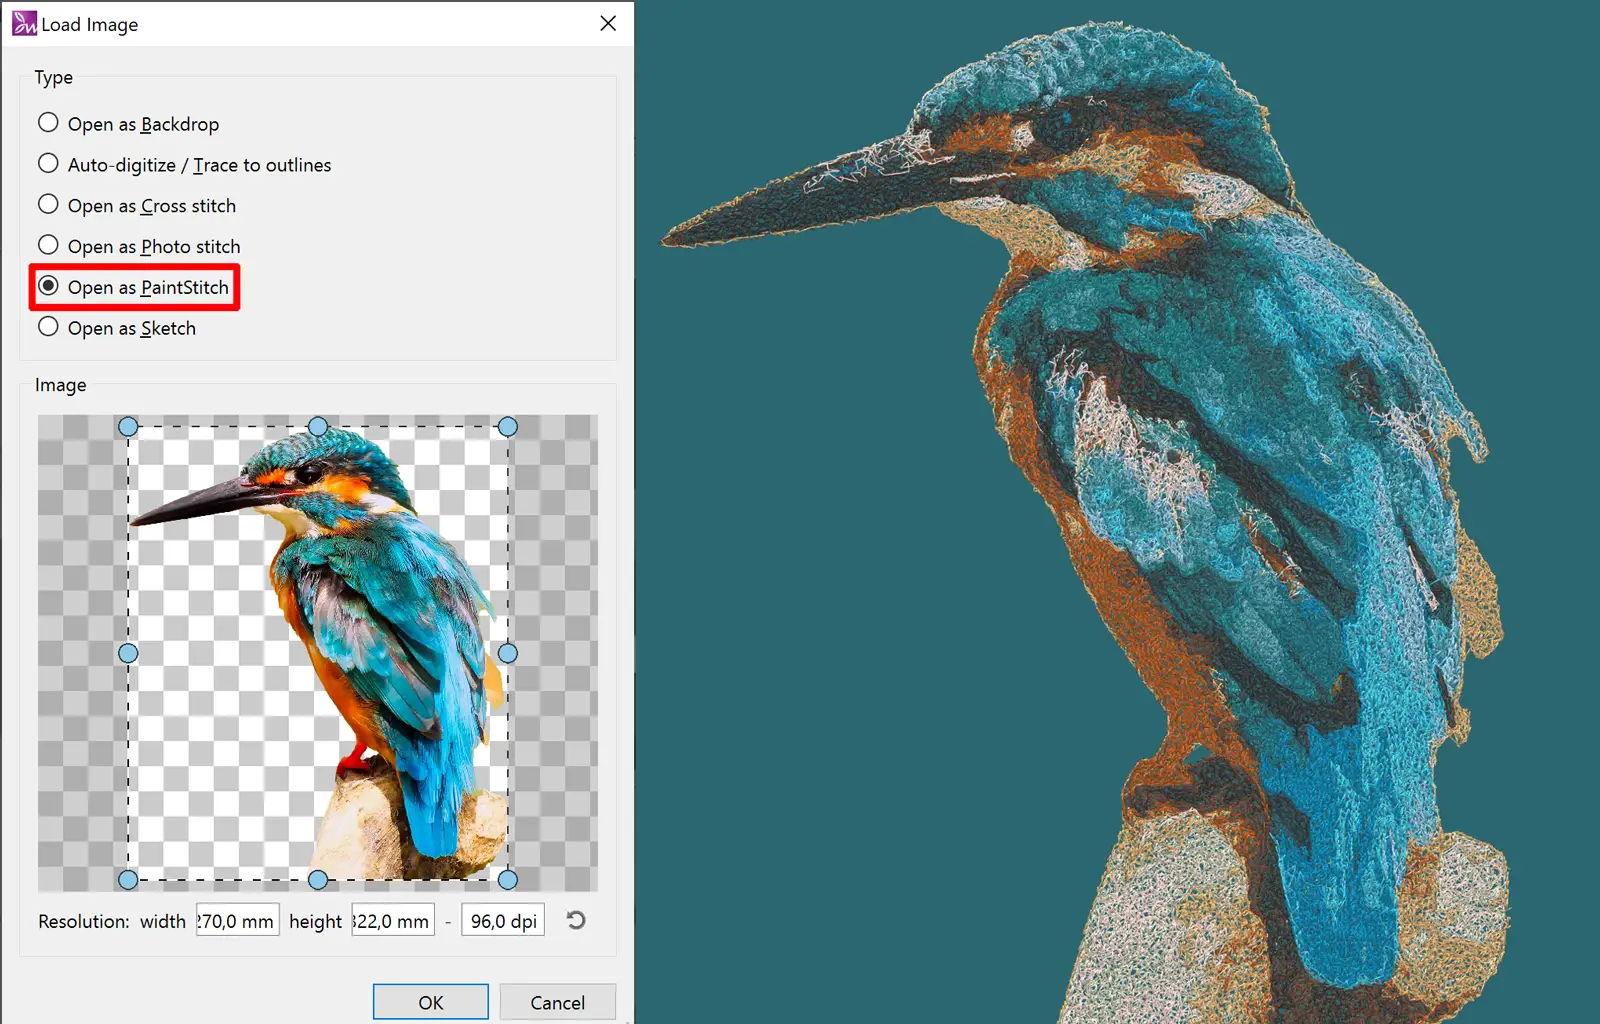 Convert images with transparency to stitches without filling the transparent areas